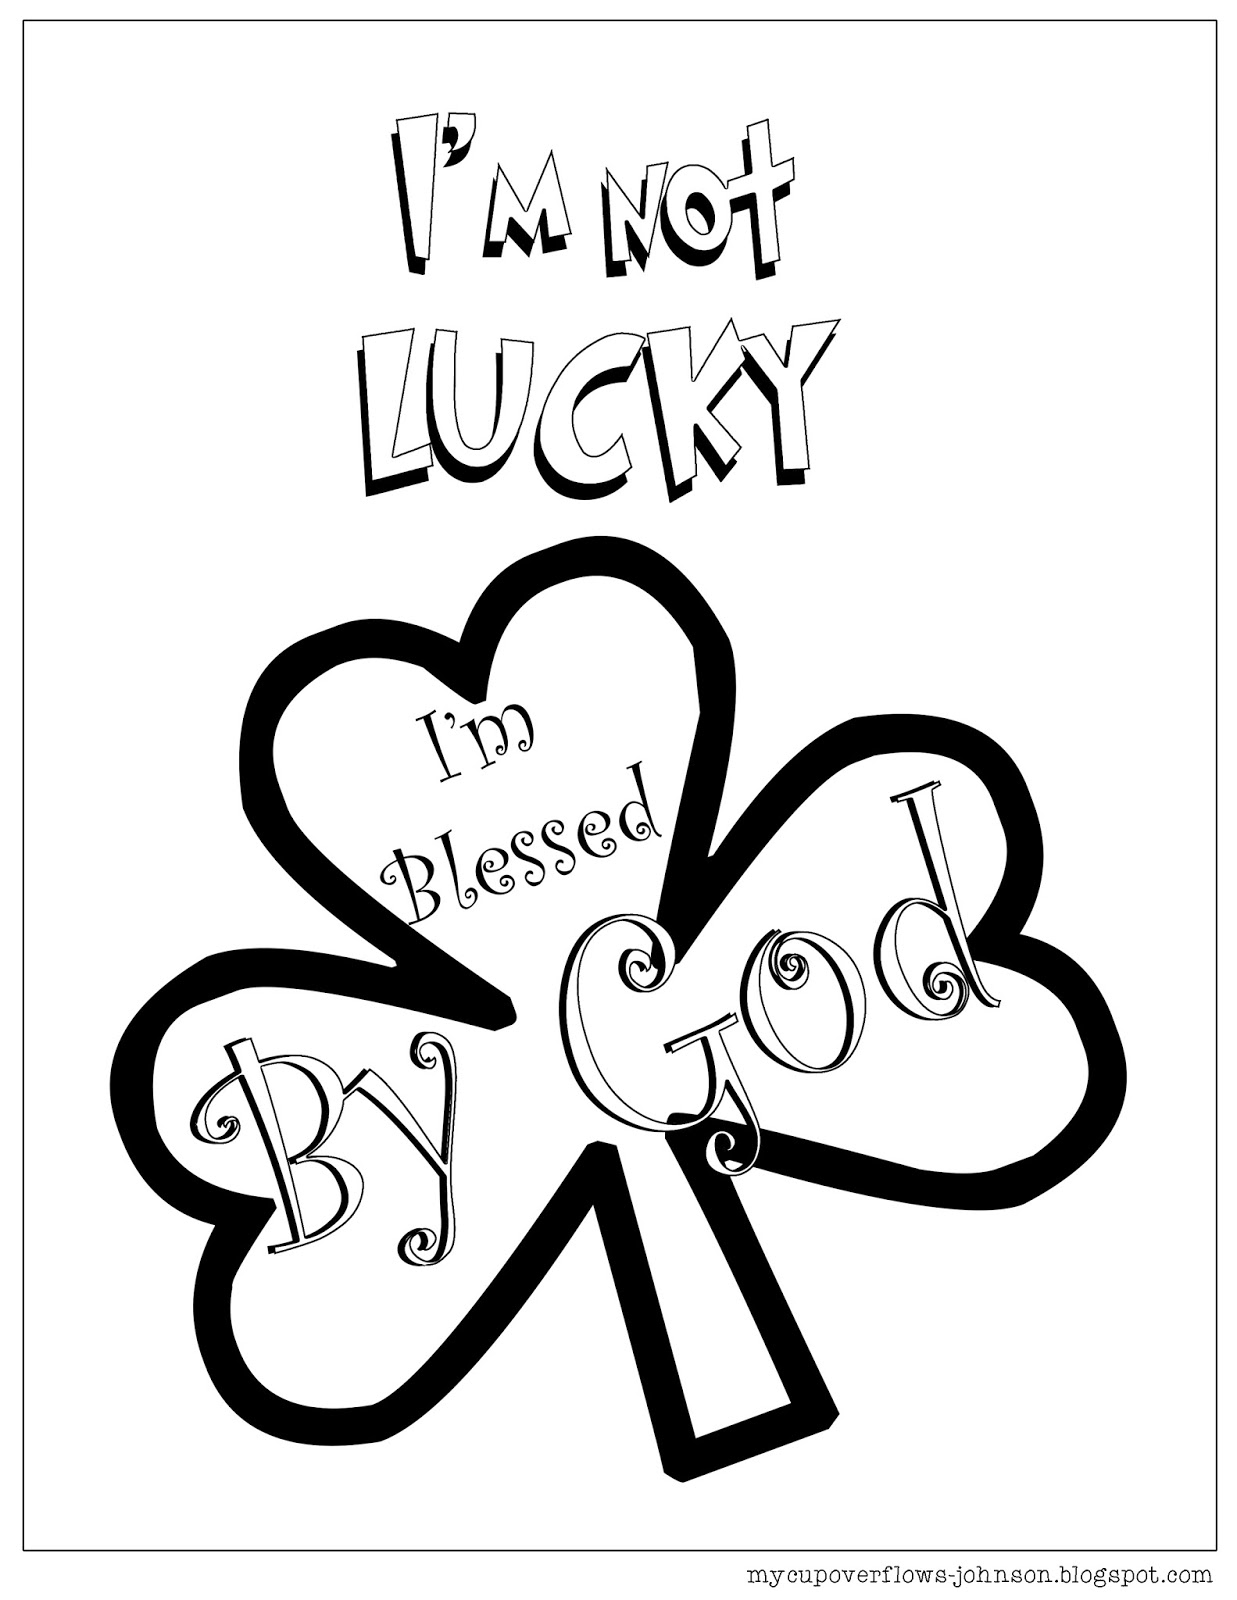 My Cup Overflows: St. Patrick's Day Coloring Pages